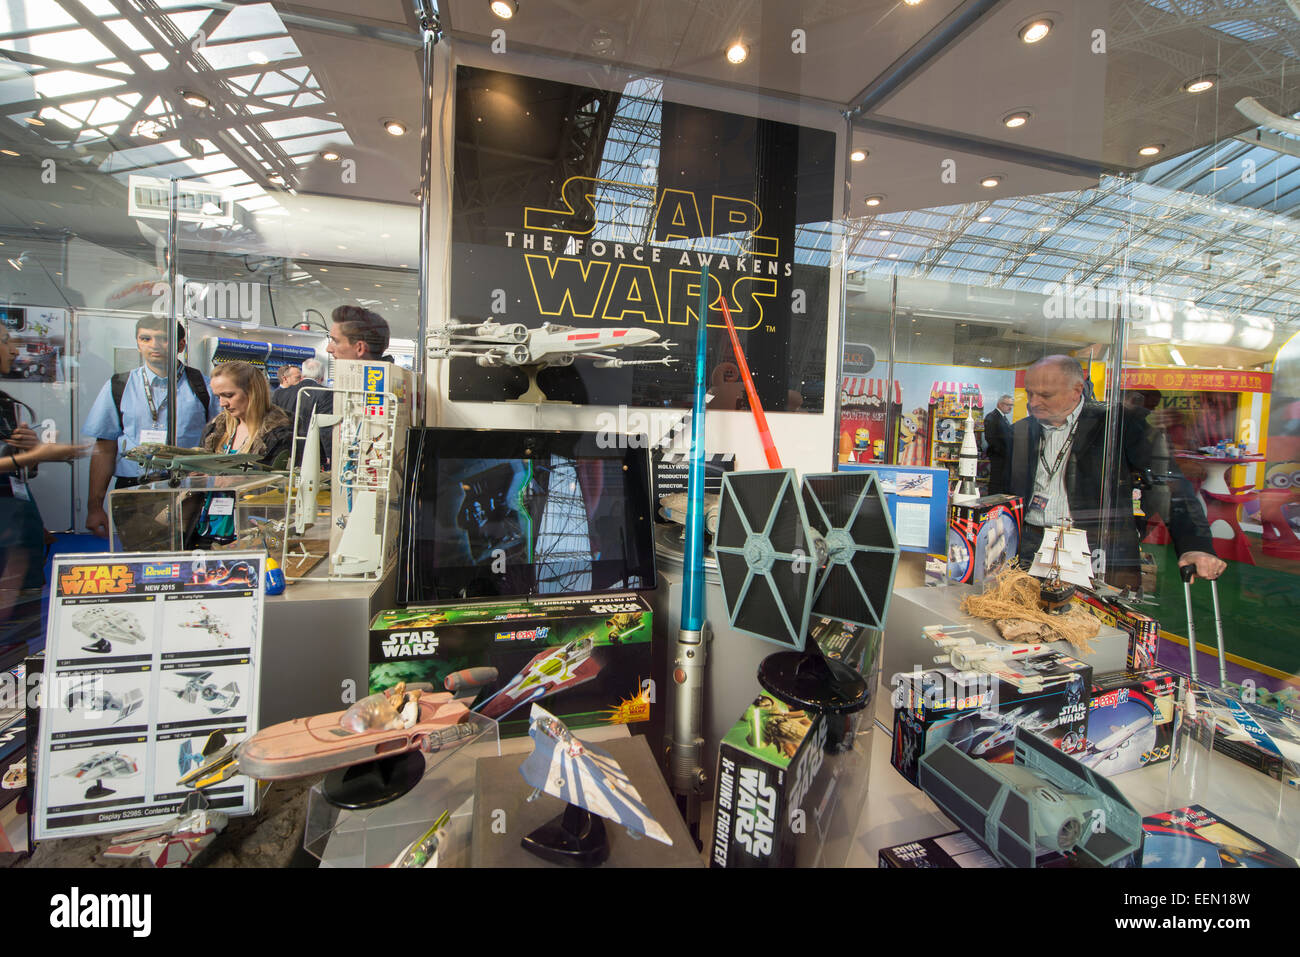 Kensington Olympia, London, UK. 20th January, 2015. The UK’s annual only dedicated toy, game and hobby trade show runs from 20th-22nd January with over 260 companies exhibiting thousands of products to buyers and the media. Credit: Malcolm Park editorial/Alamy Live News Stock Photo